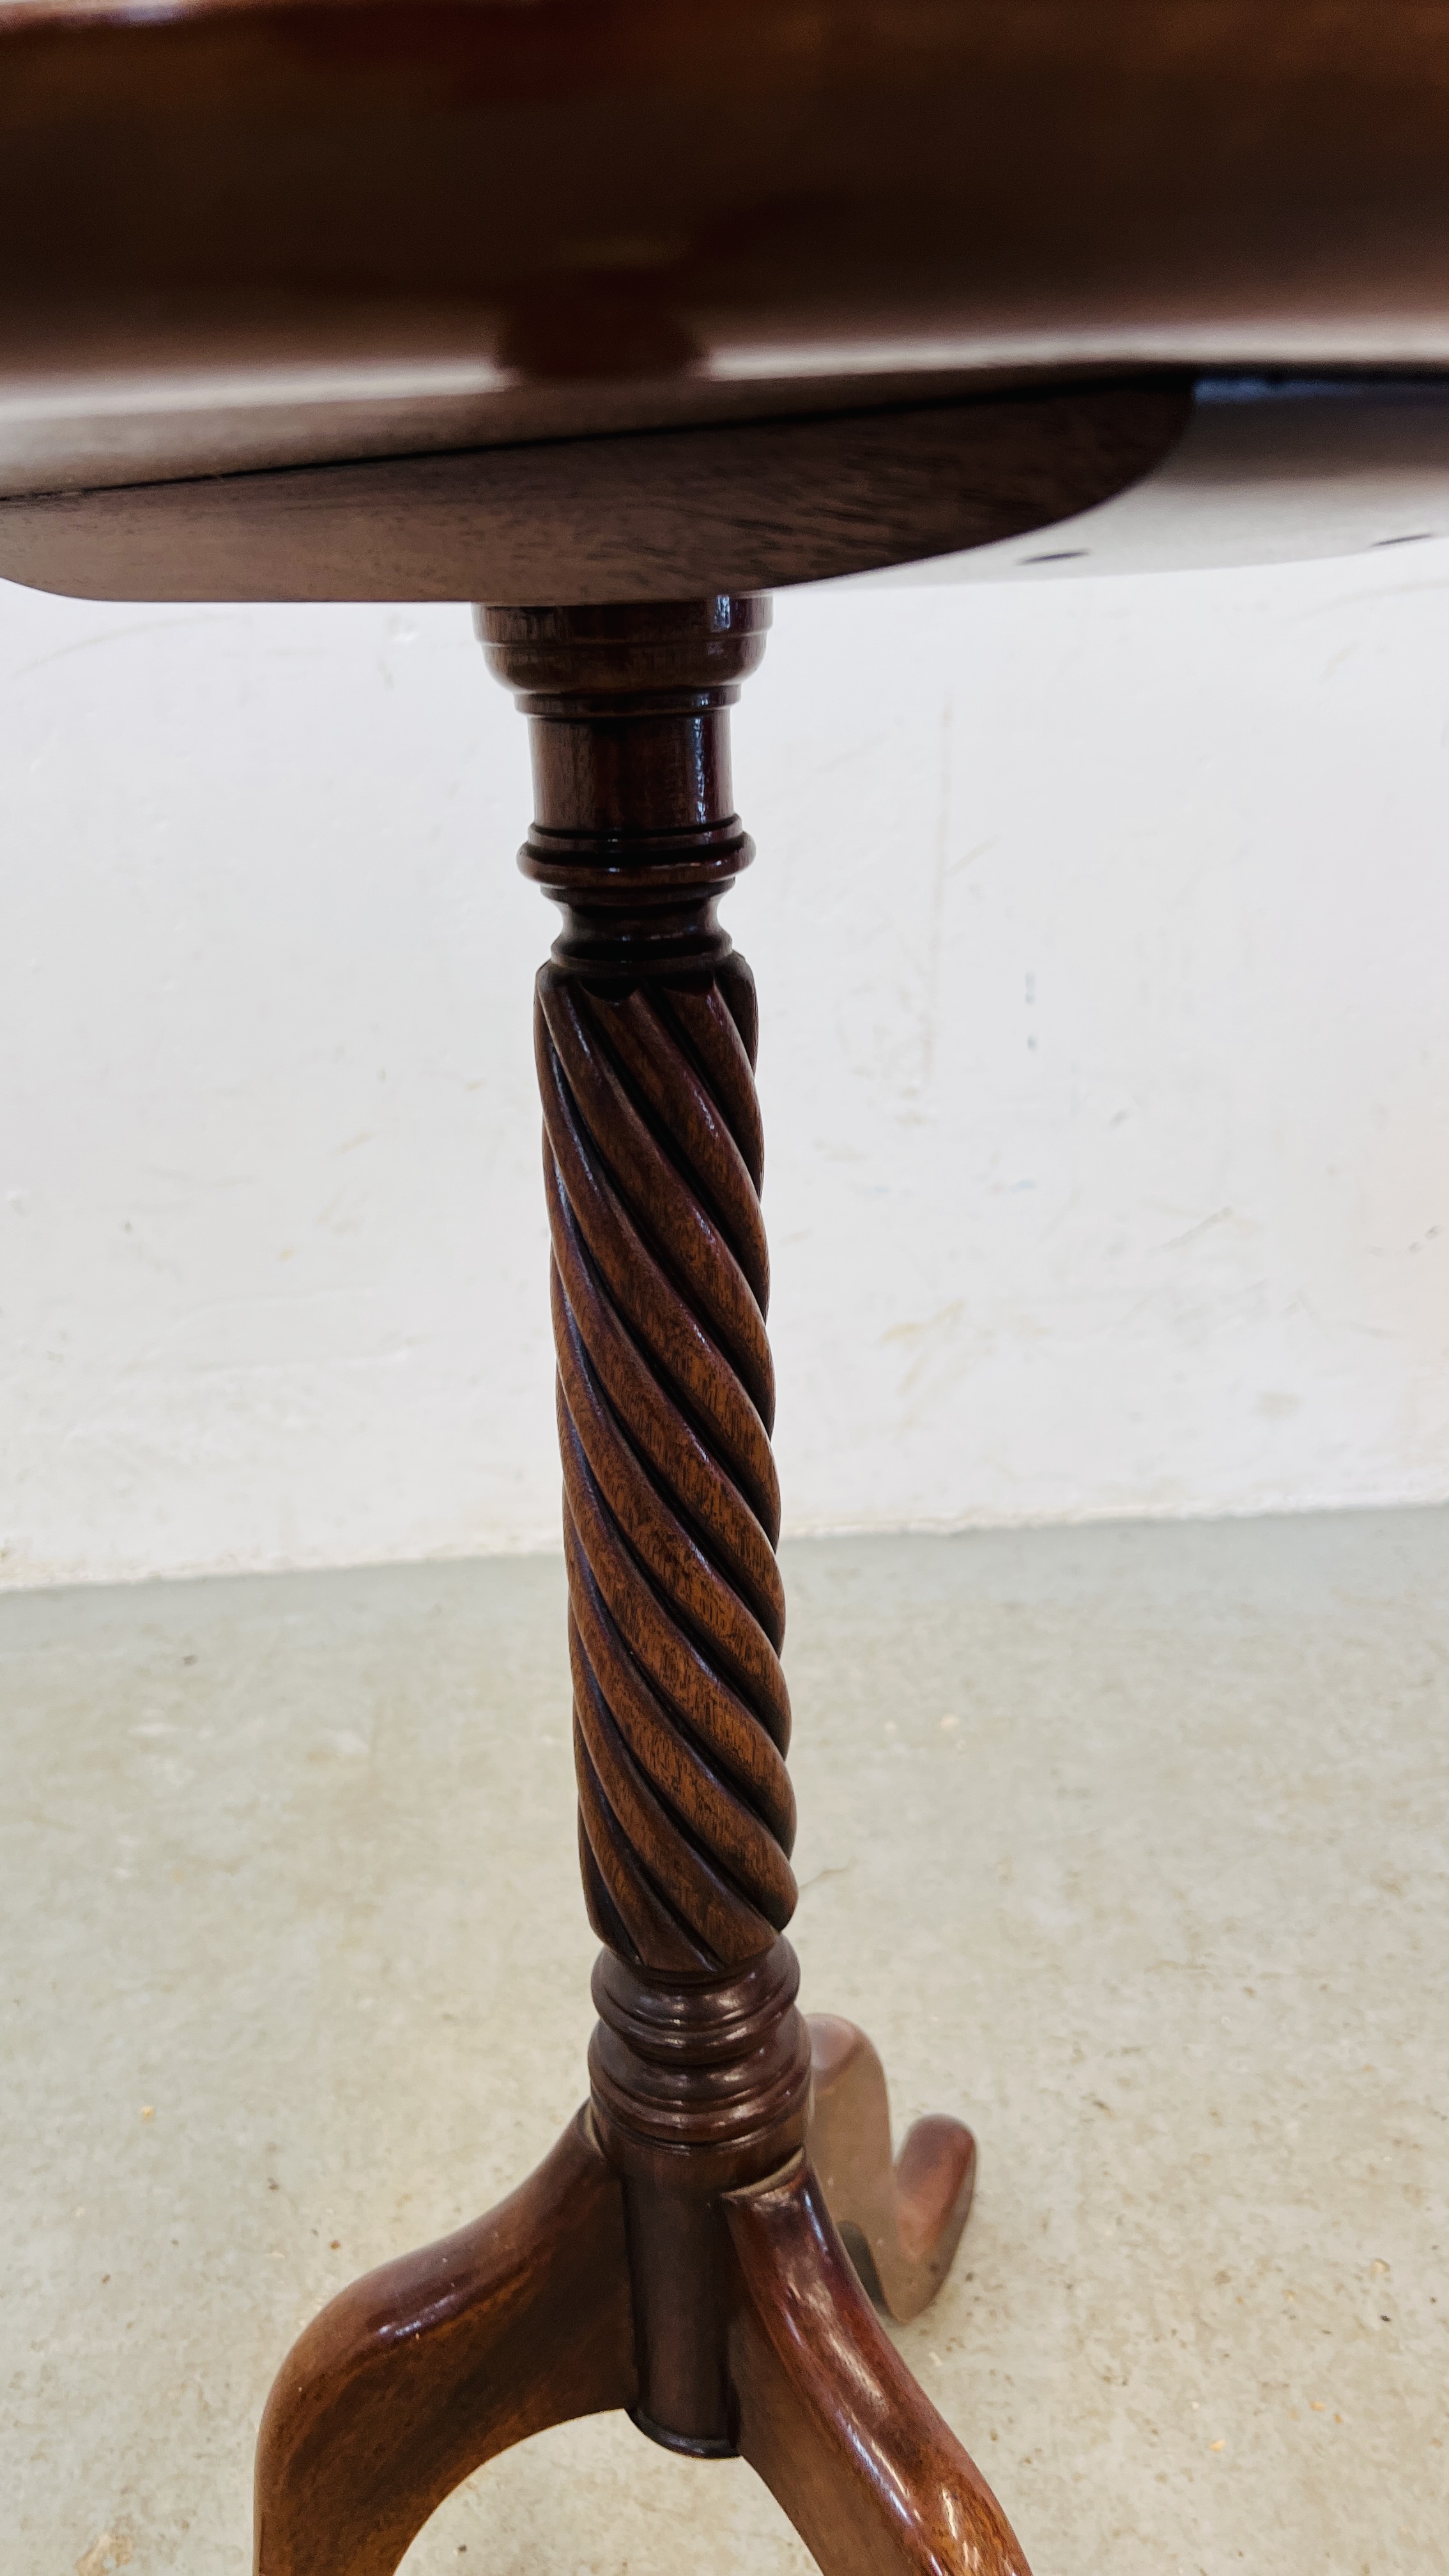 TWO GOOD QUALITY REPRODUCTION MAHOGANY PEDESTAL WINE TABLES, ONE WITH RIVEN COLUMN DETAIL. - Image 8 of 8